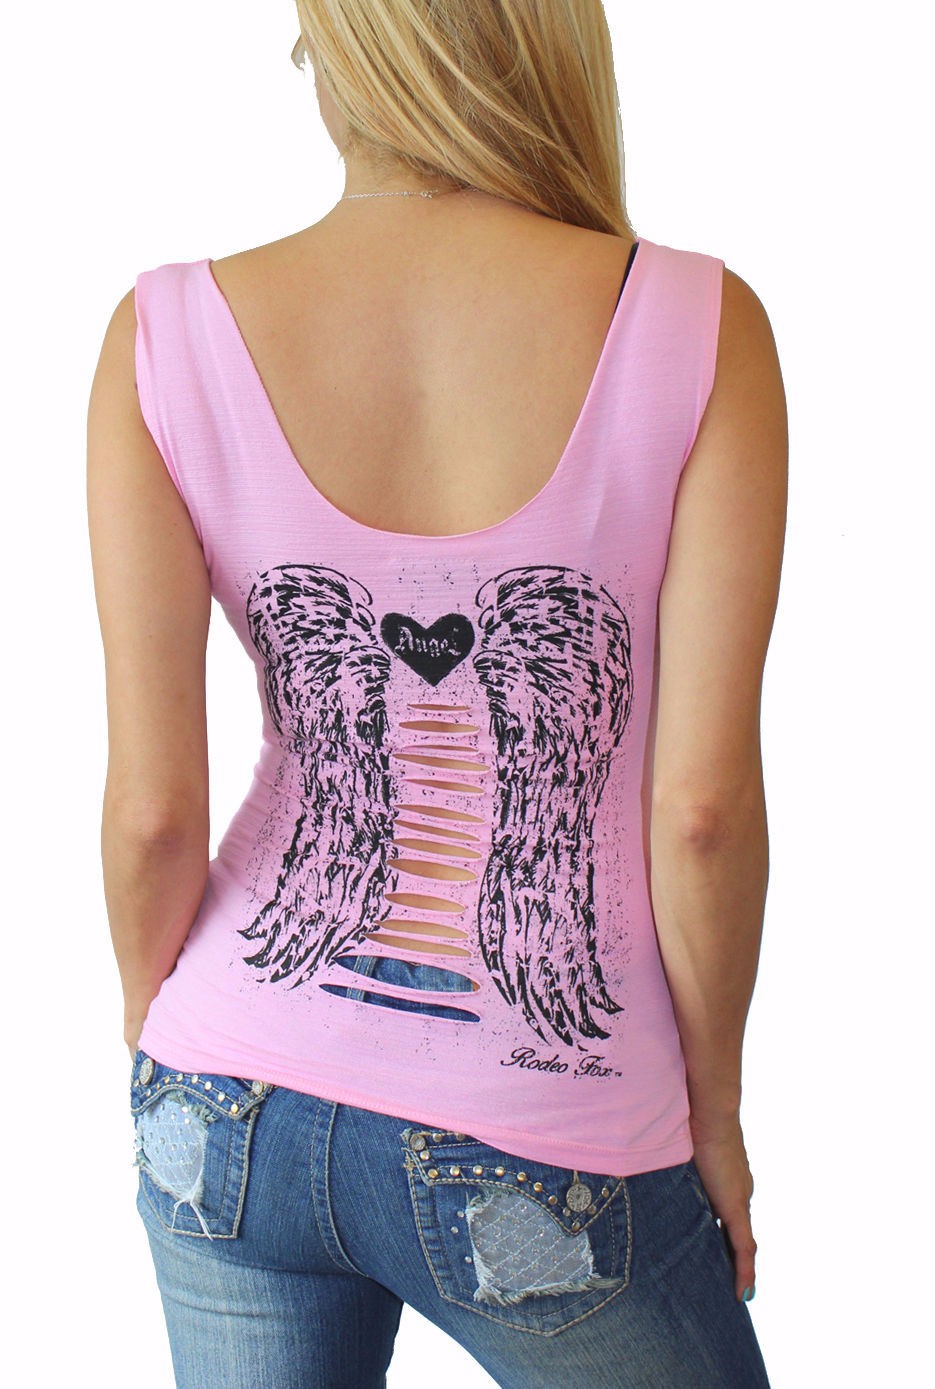 2016-Fashion-Women39s-T-shirt-Back-Hollow-Angel-Wings-T-shirt-Tops-Summer-Style-Woman-Lace-Short-Sle-32701959423